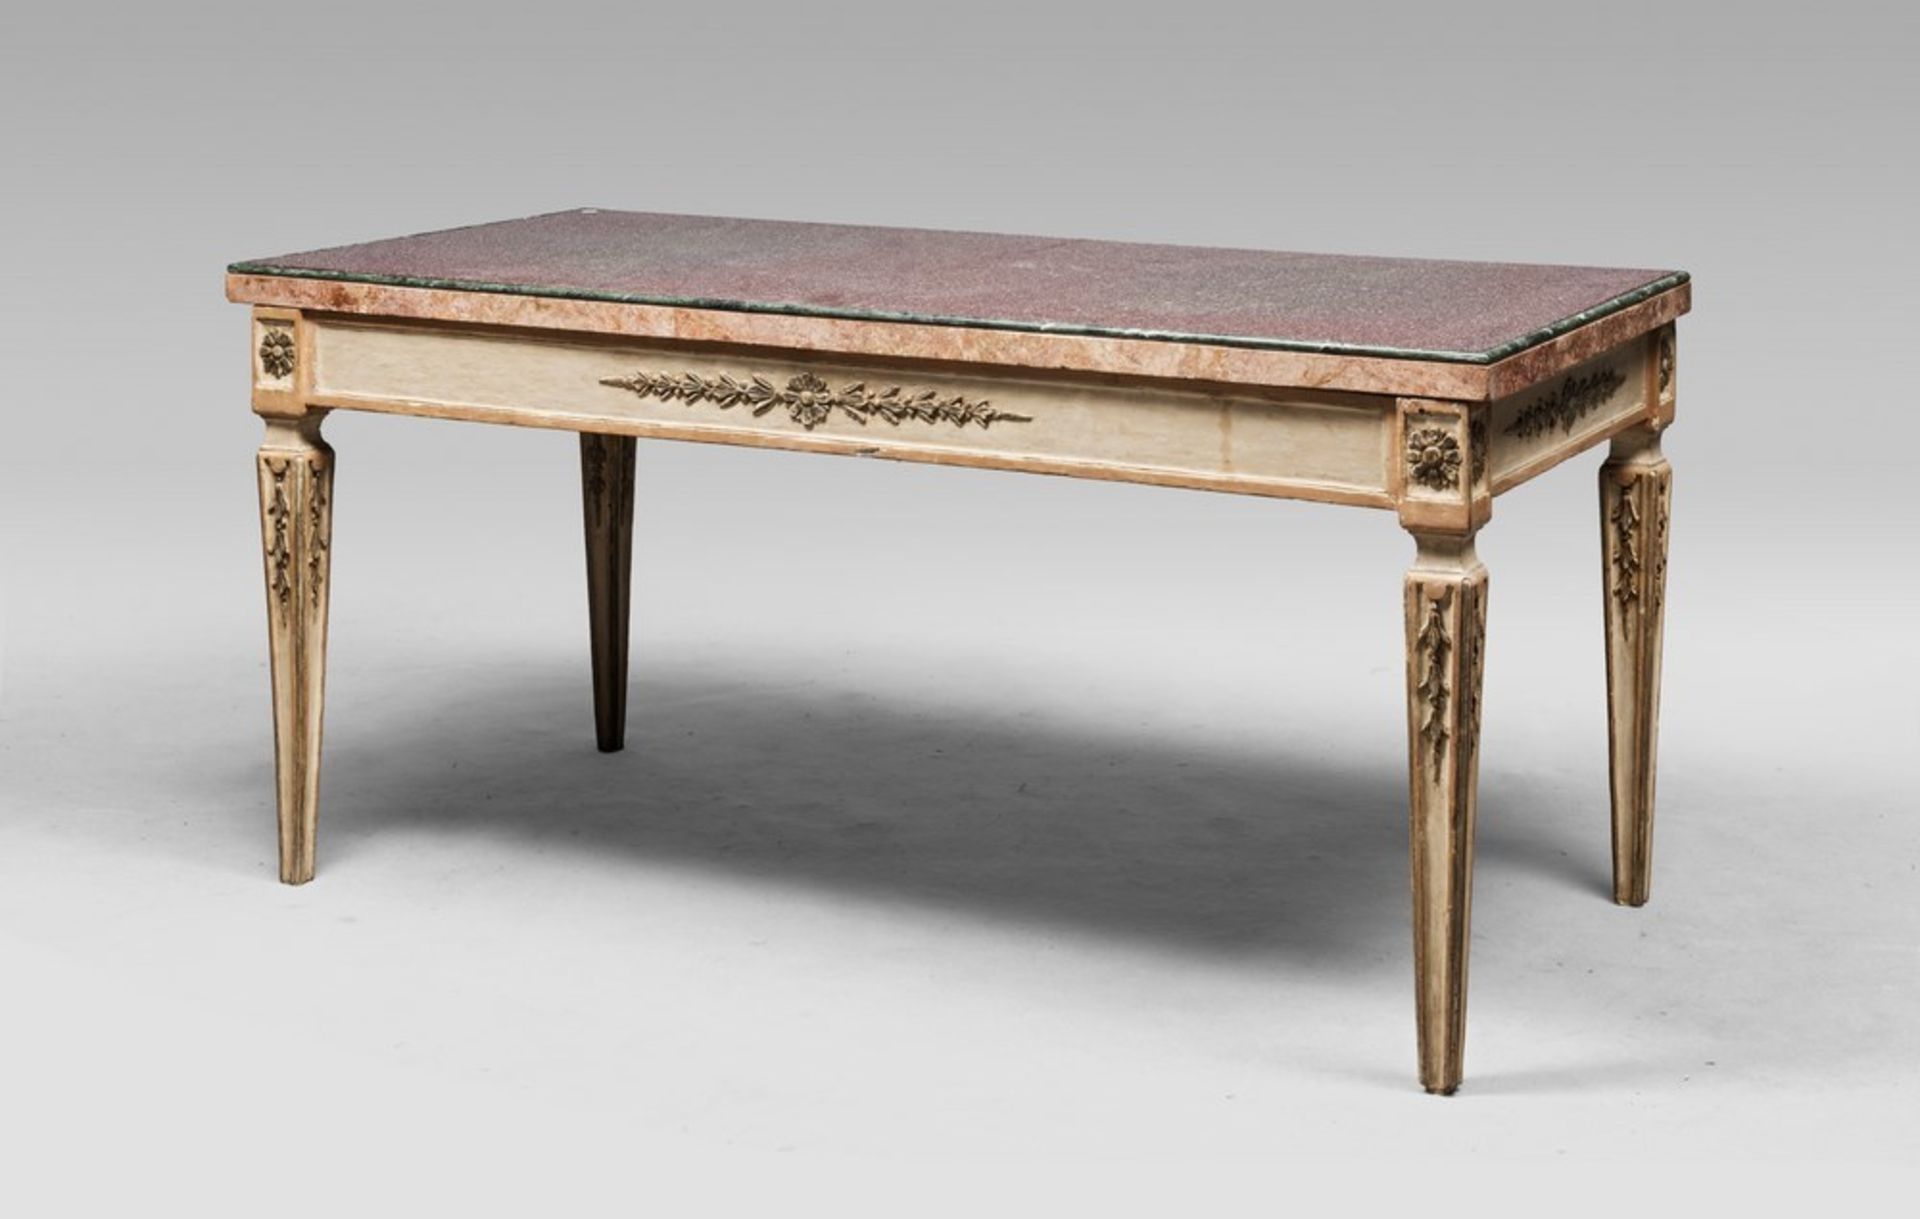 LACQUERED WOOD TABLE, NAPLES LATE 18TH CENTURY with white lacquer finishes and gold trim. Granite